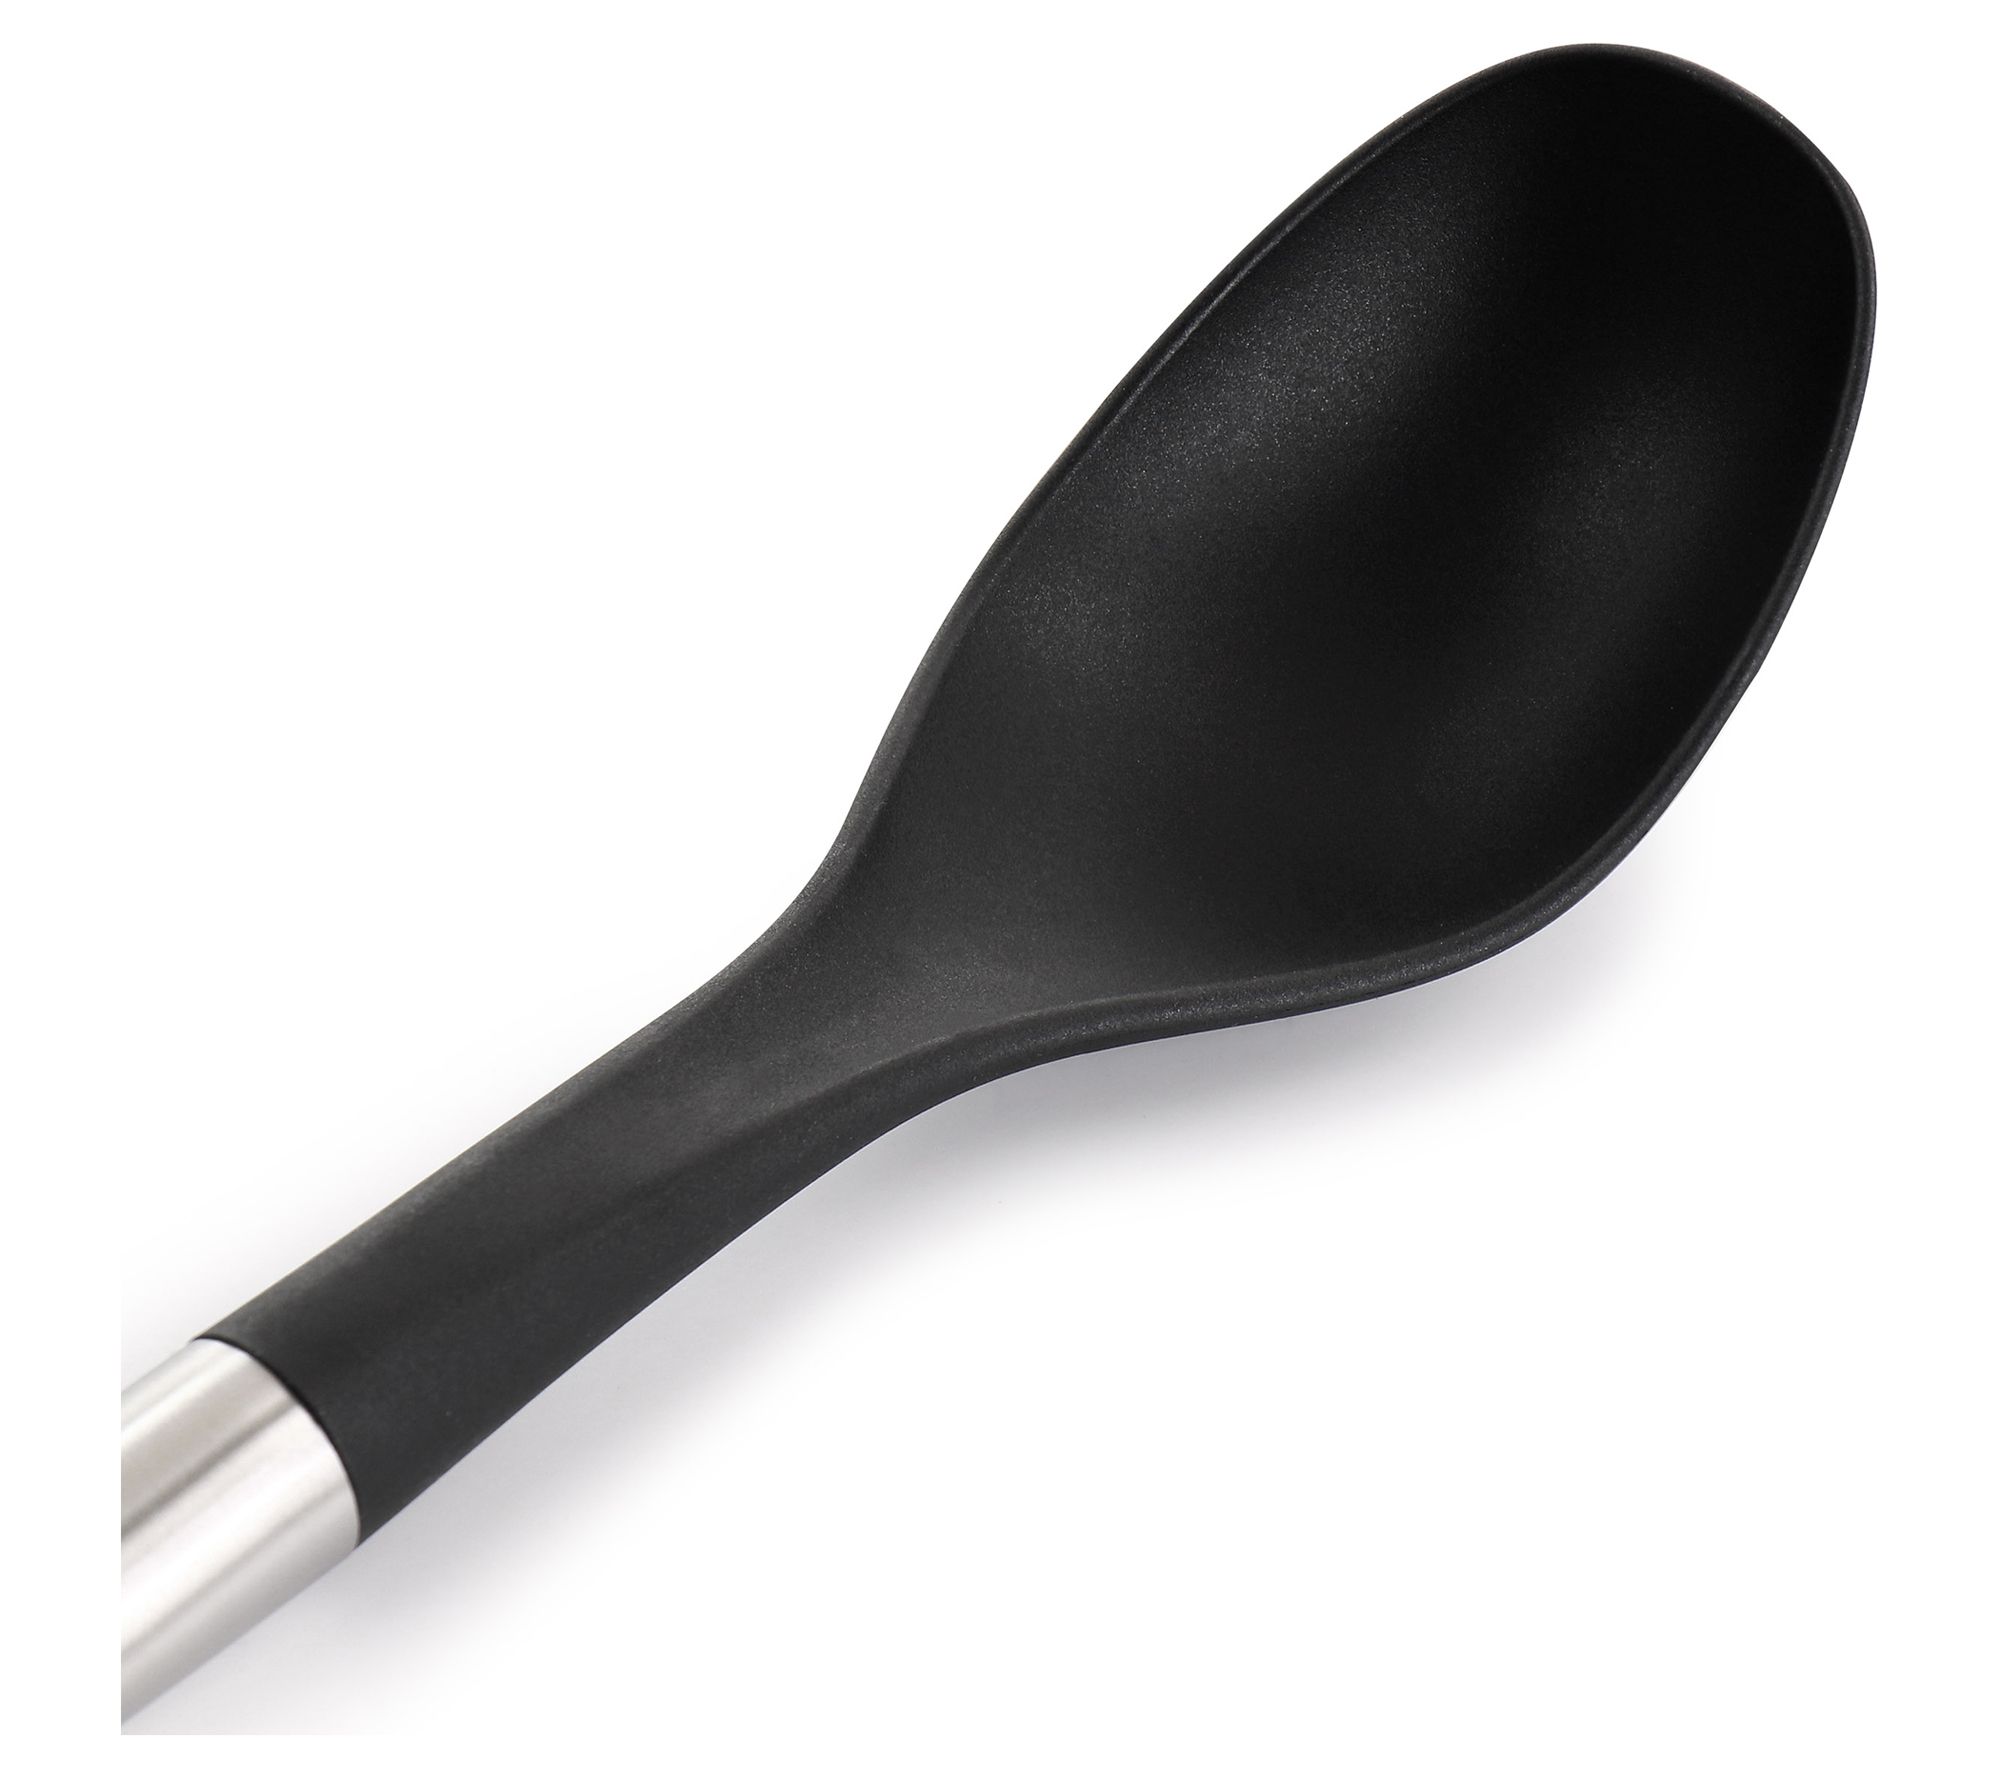 Oster Baldwyn Stainless Steel and Plastic Ice Cream Scoop